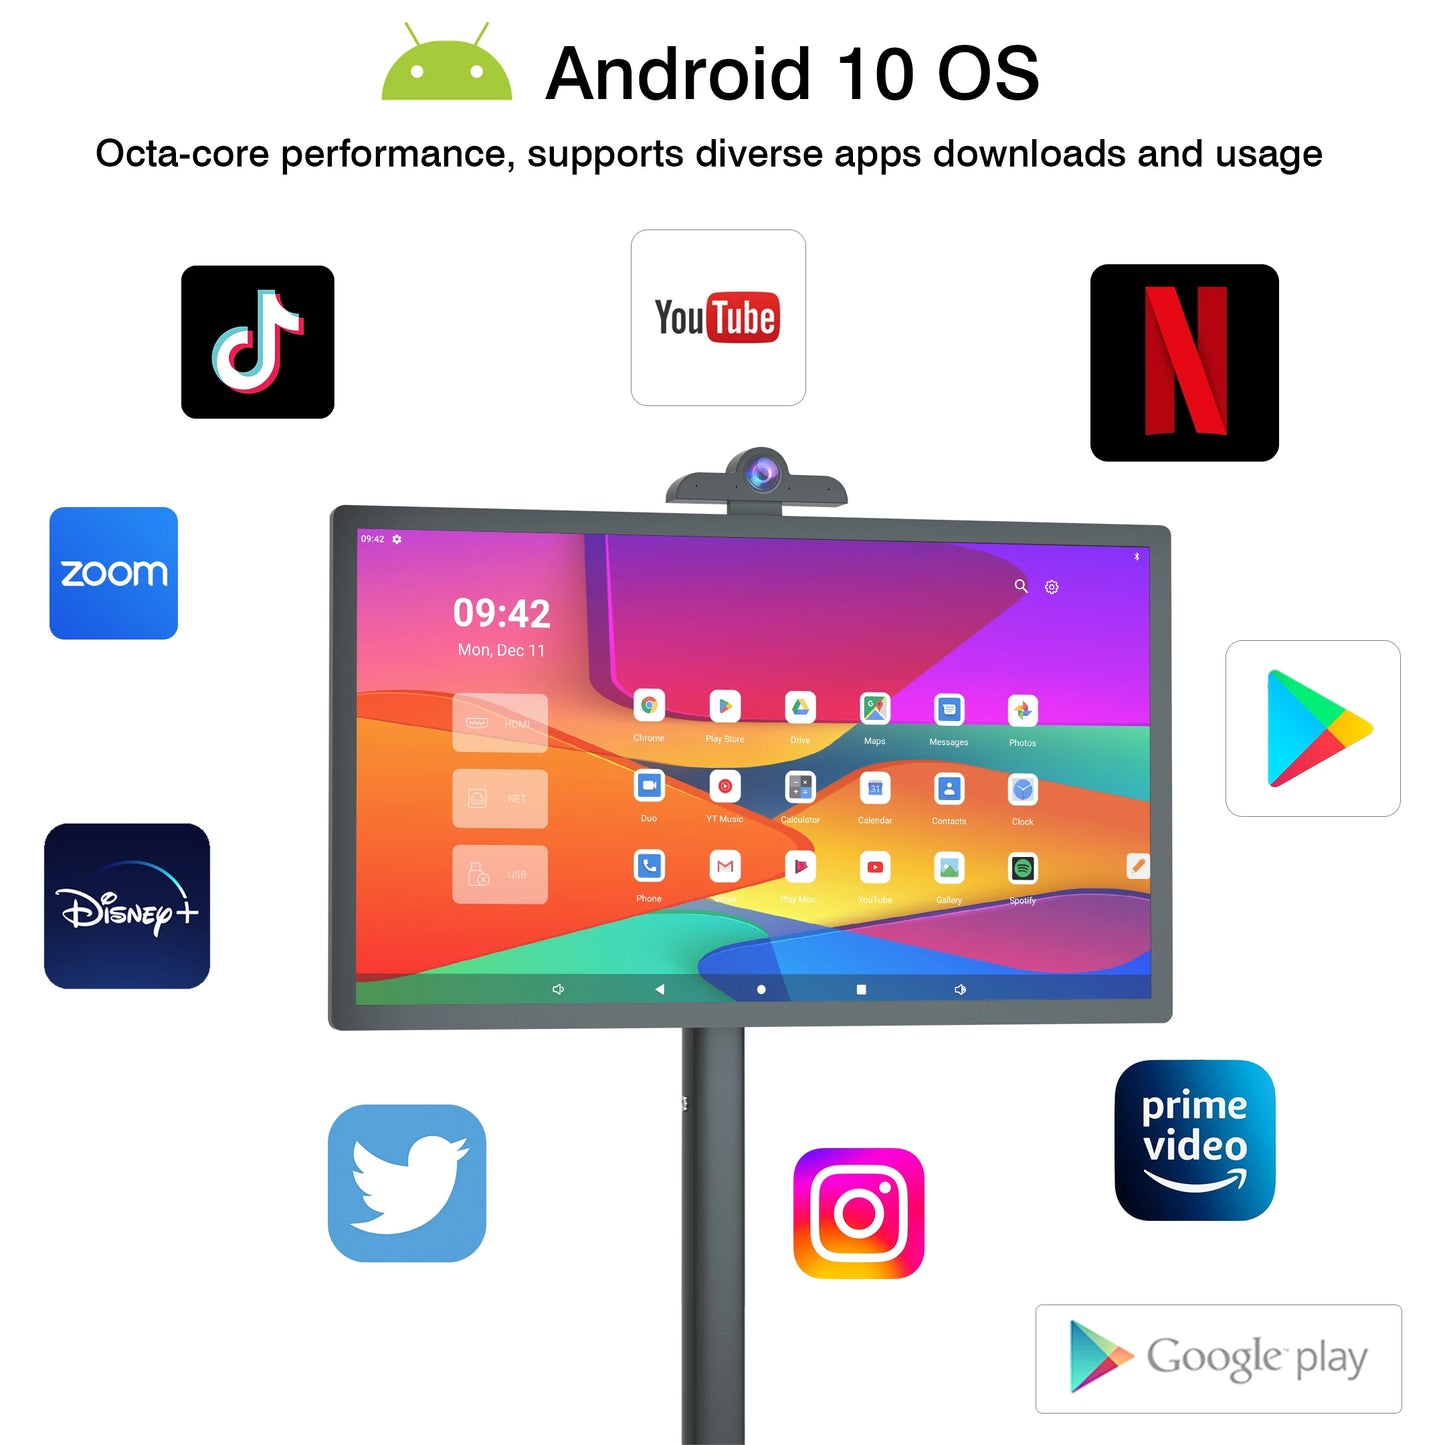 32 inch touch screen1080p Rotatable Monitor Android OS Support Google Store Stanbyme televisions portable tv